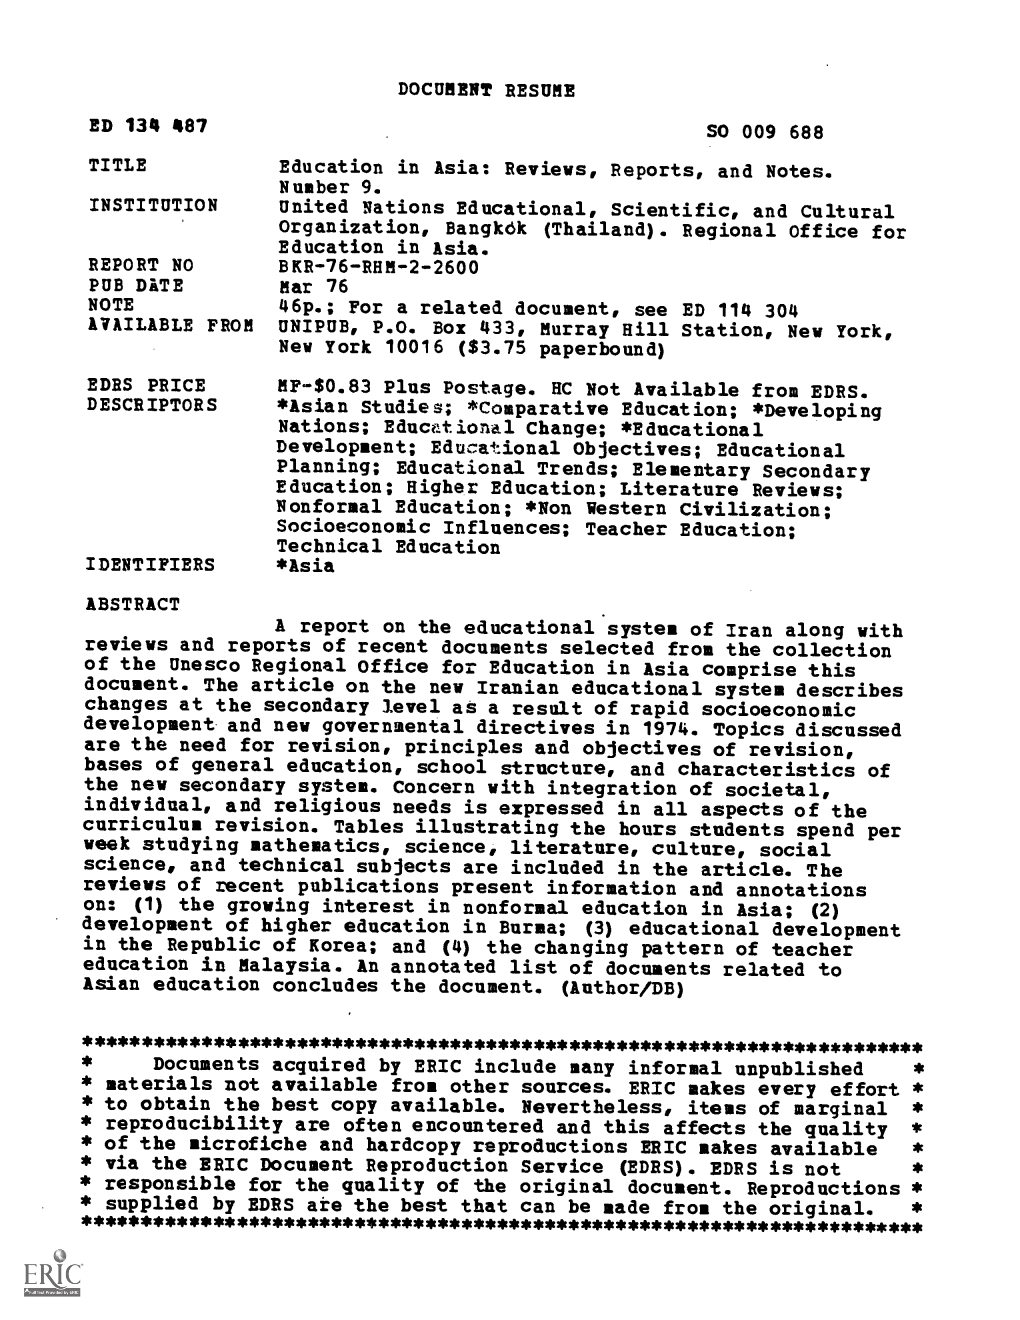 REPORT NO BKR-76-RHM-2-2600 PUB DATE Mar 76 NOTE 46P.; for a Related Document, See ED 114 304 AVAILABLE FROMUNIPUB, P.O